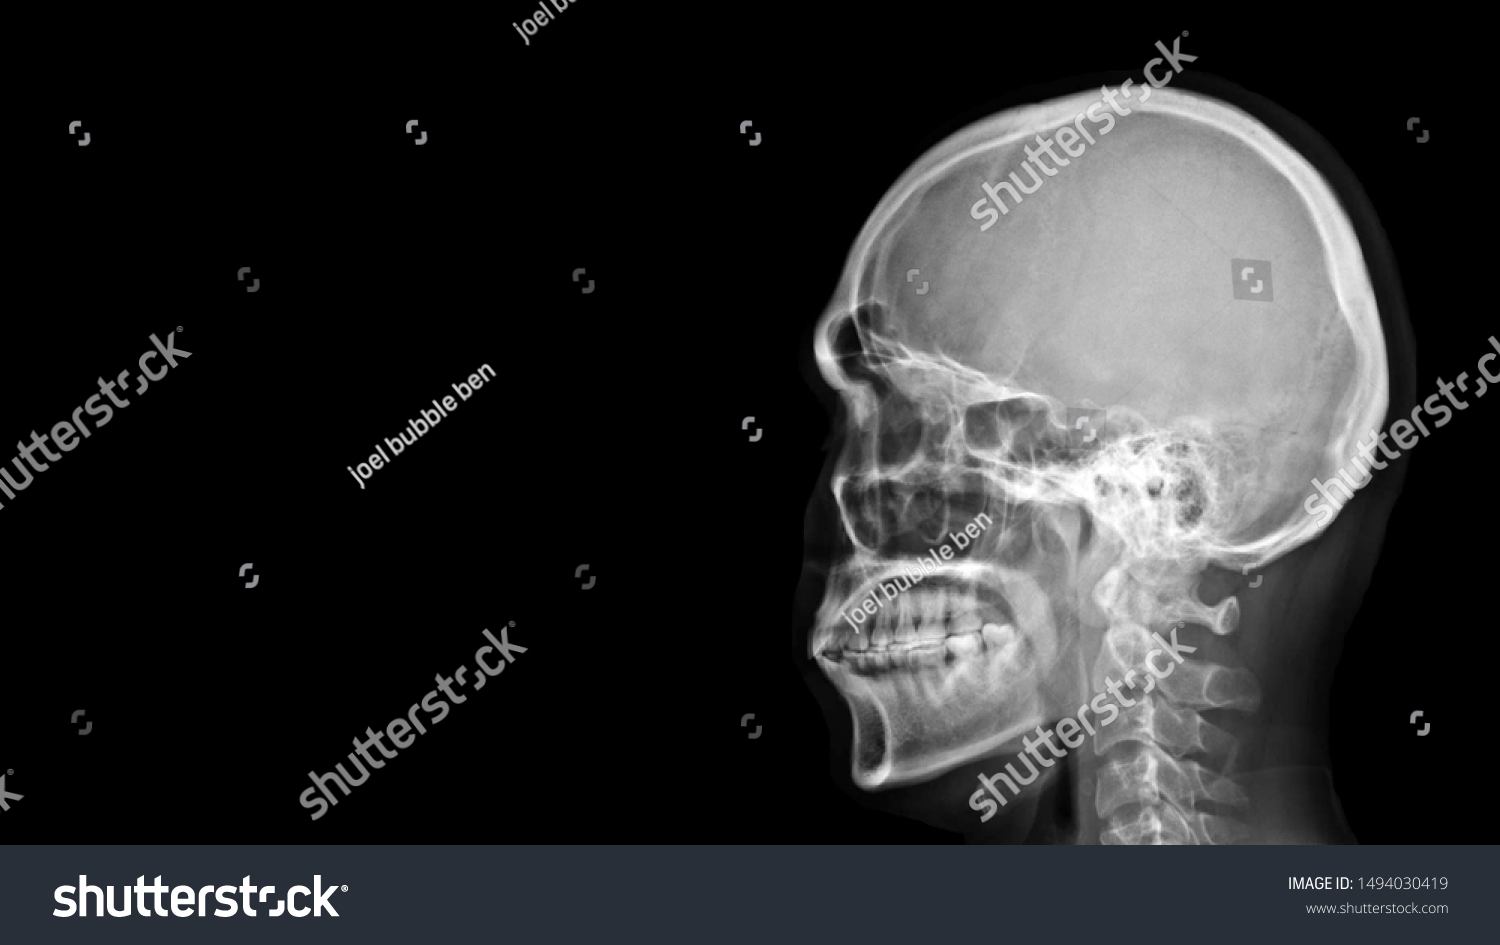 Film X-ray radiograph show human anatomy of bone skull, cervical spine and skeleton with free black space background.  Medical imaging in neurology and radiology concept  #1494030419